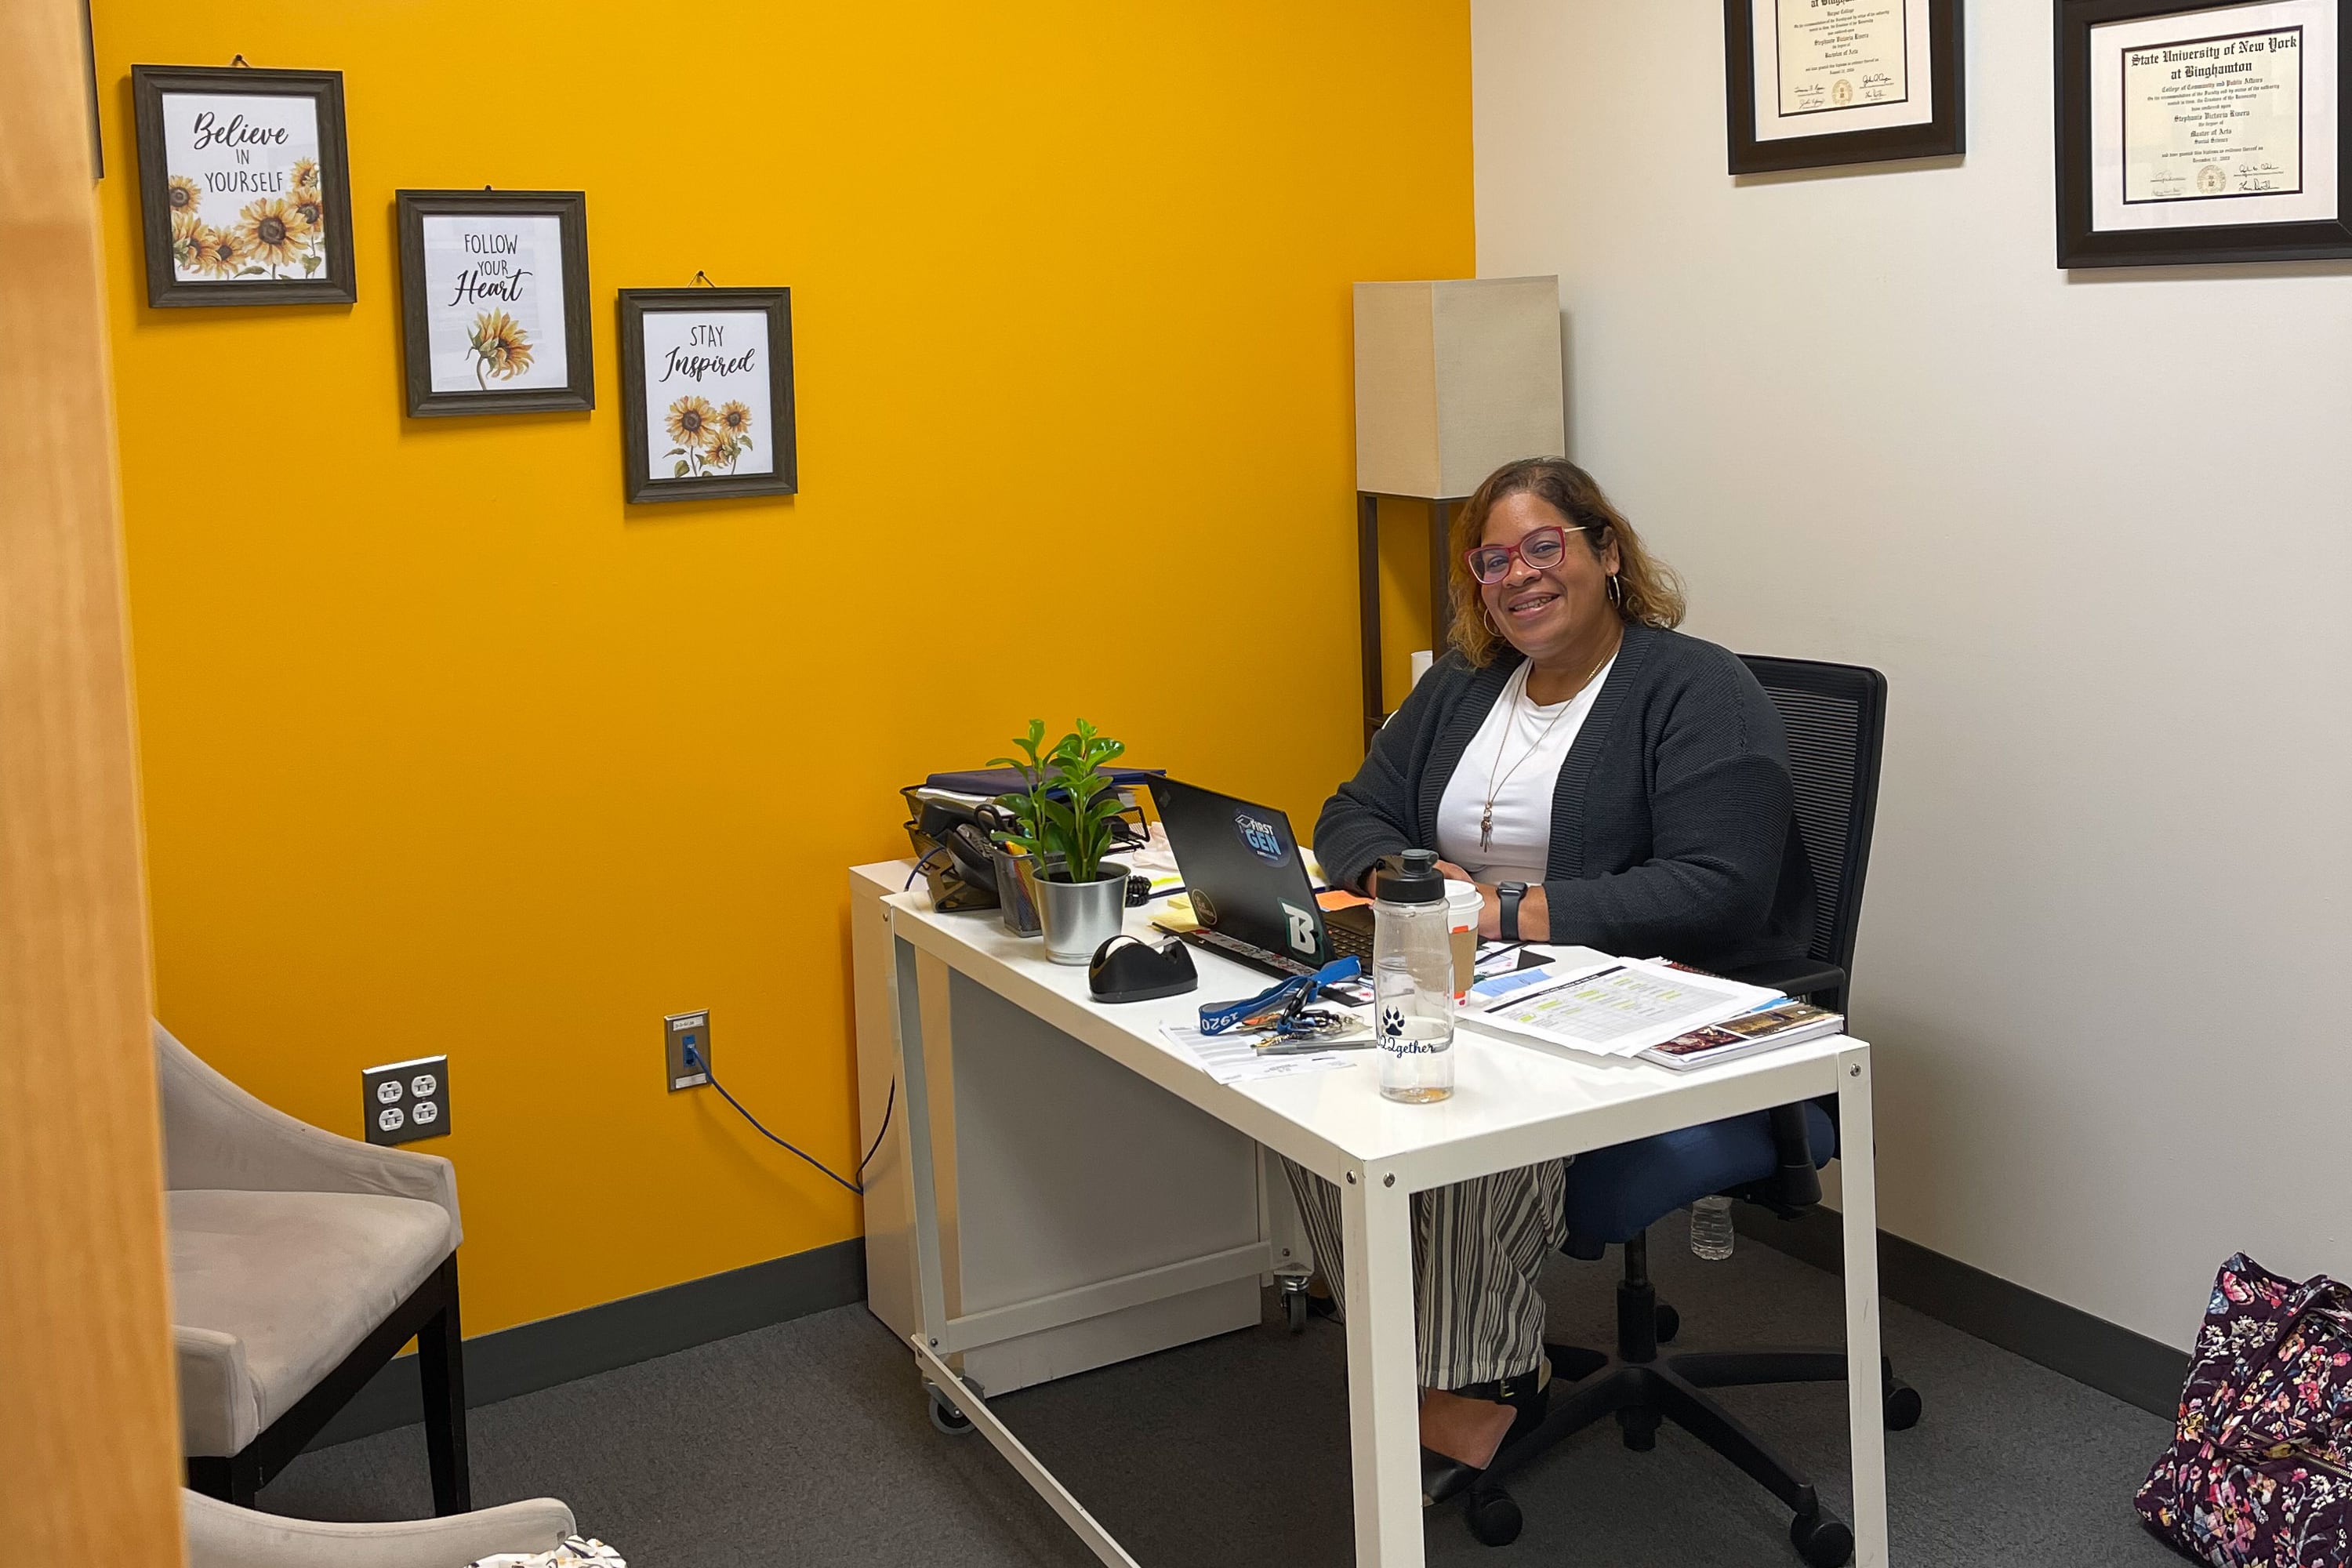 A woman wearing a black sweater and white shirt poses for a portrait at her desk. The room has one golden-colored wall and one white one, with framed pictures and diplomas on the walls.